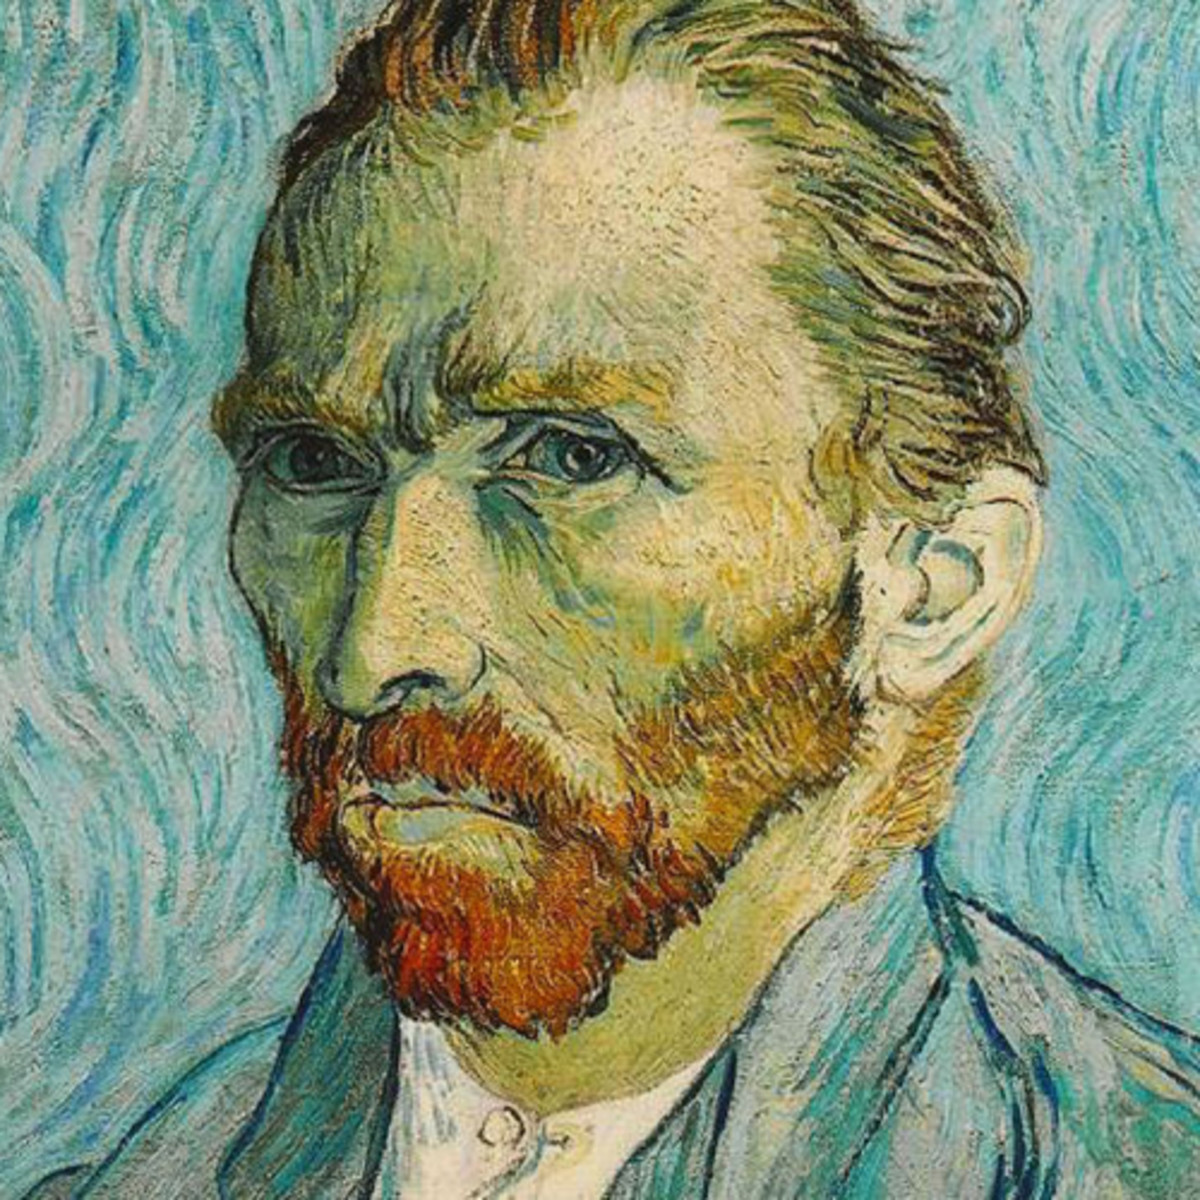 20 Inspiring Van Gogh Quotes to Keep You Motivated to Create